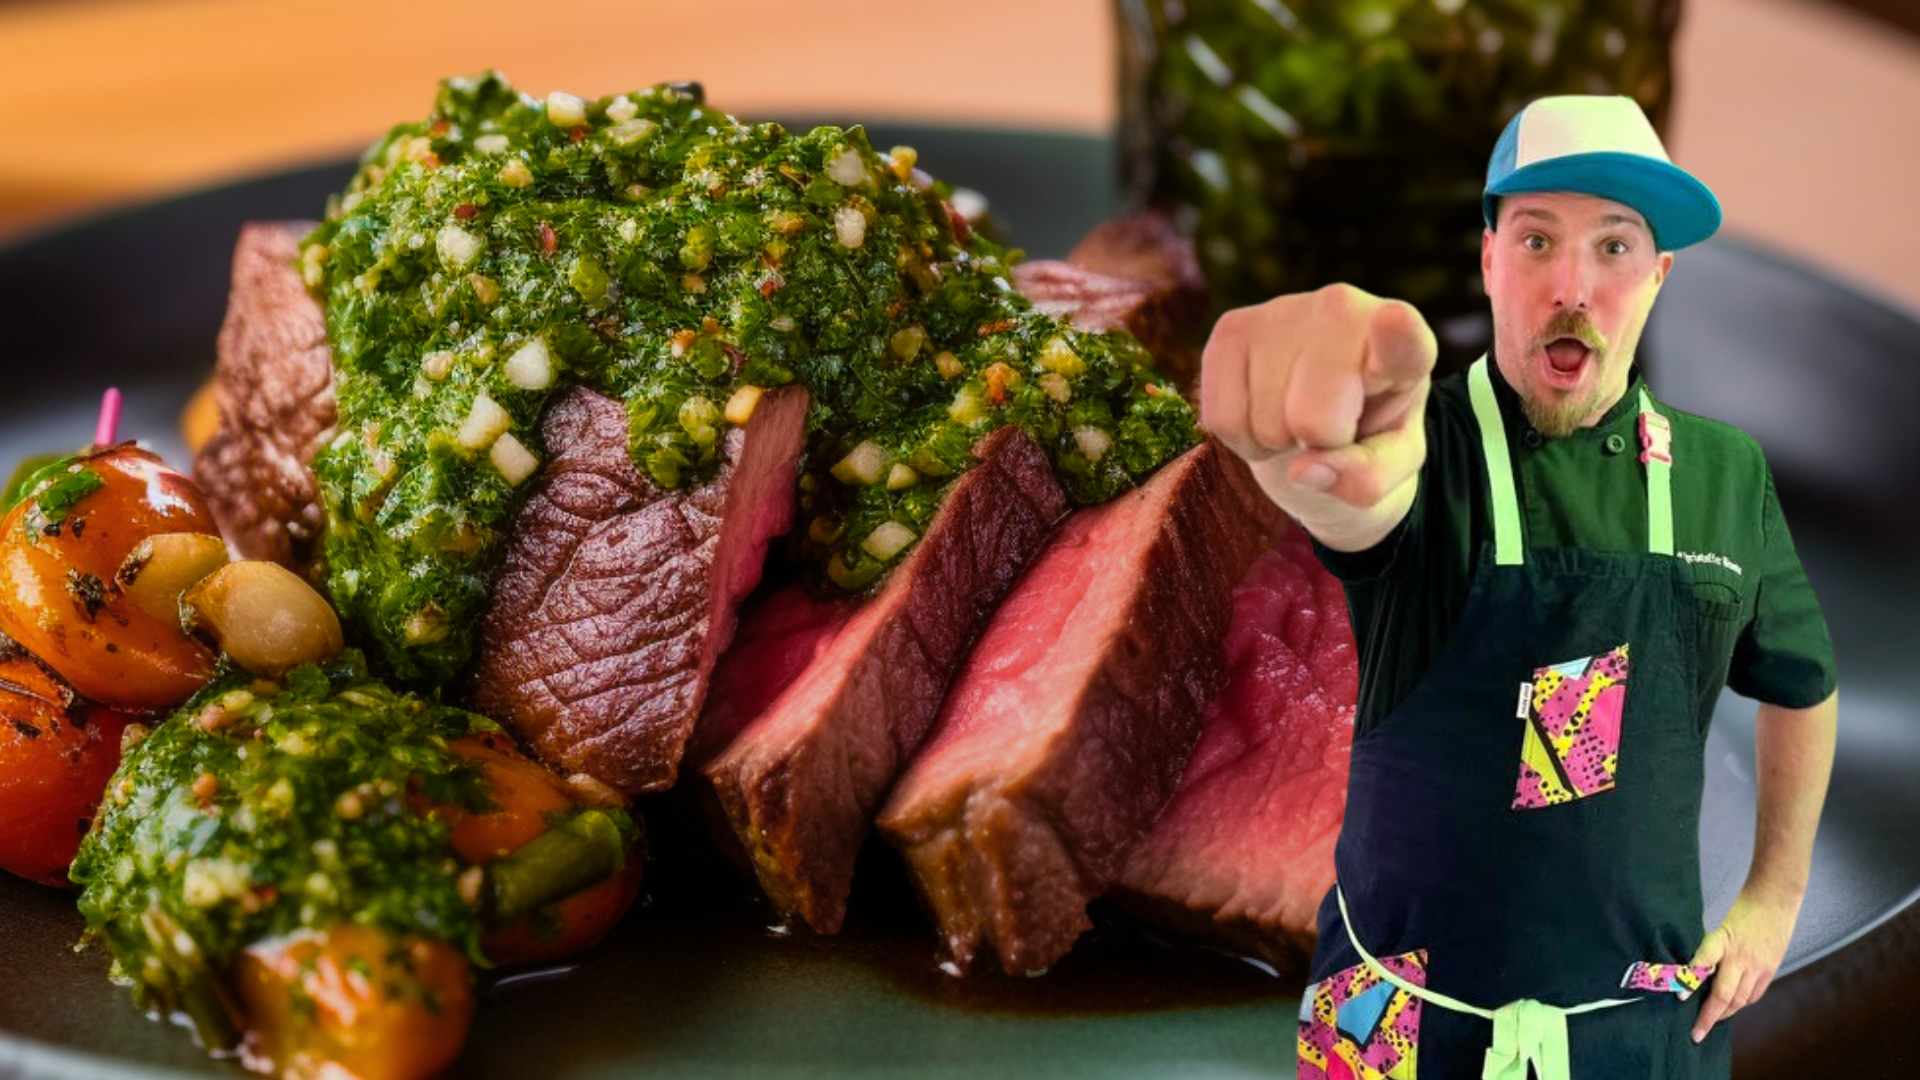 Saturday August 17 <br> Chef Binotto, "Cooking with Cannabis: Smoked Wagyu with Canna-Chimichurri"